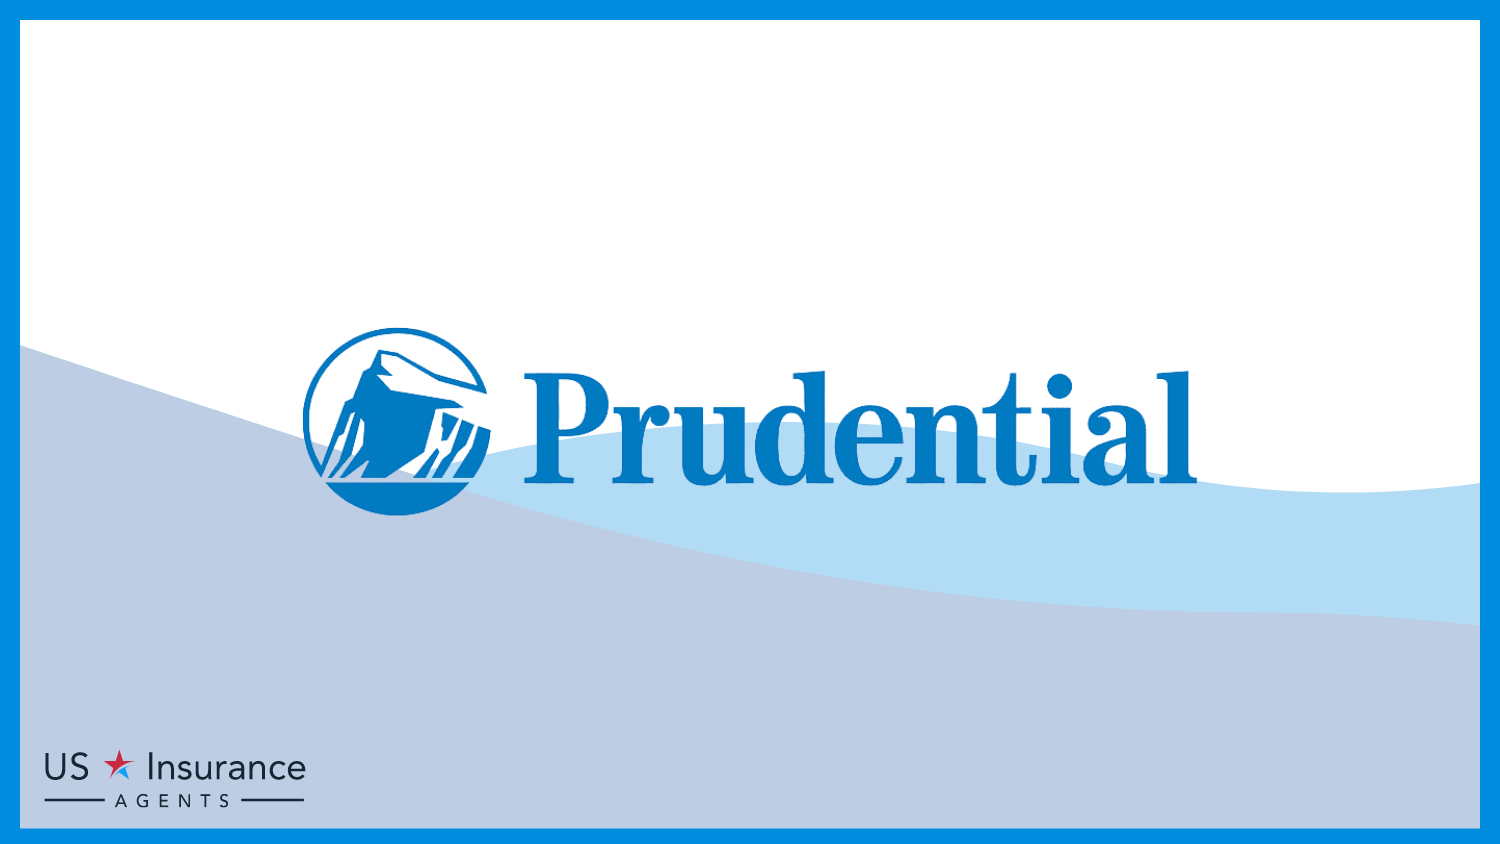 Prudential: Best Life Insurance For Military Dependents